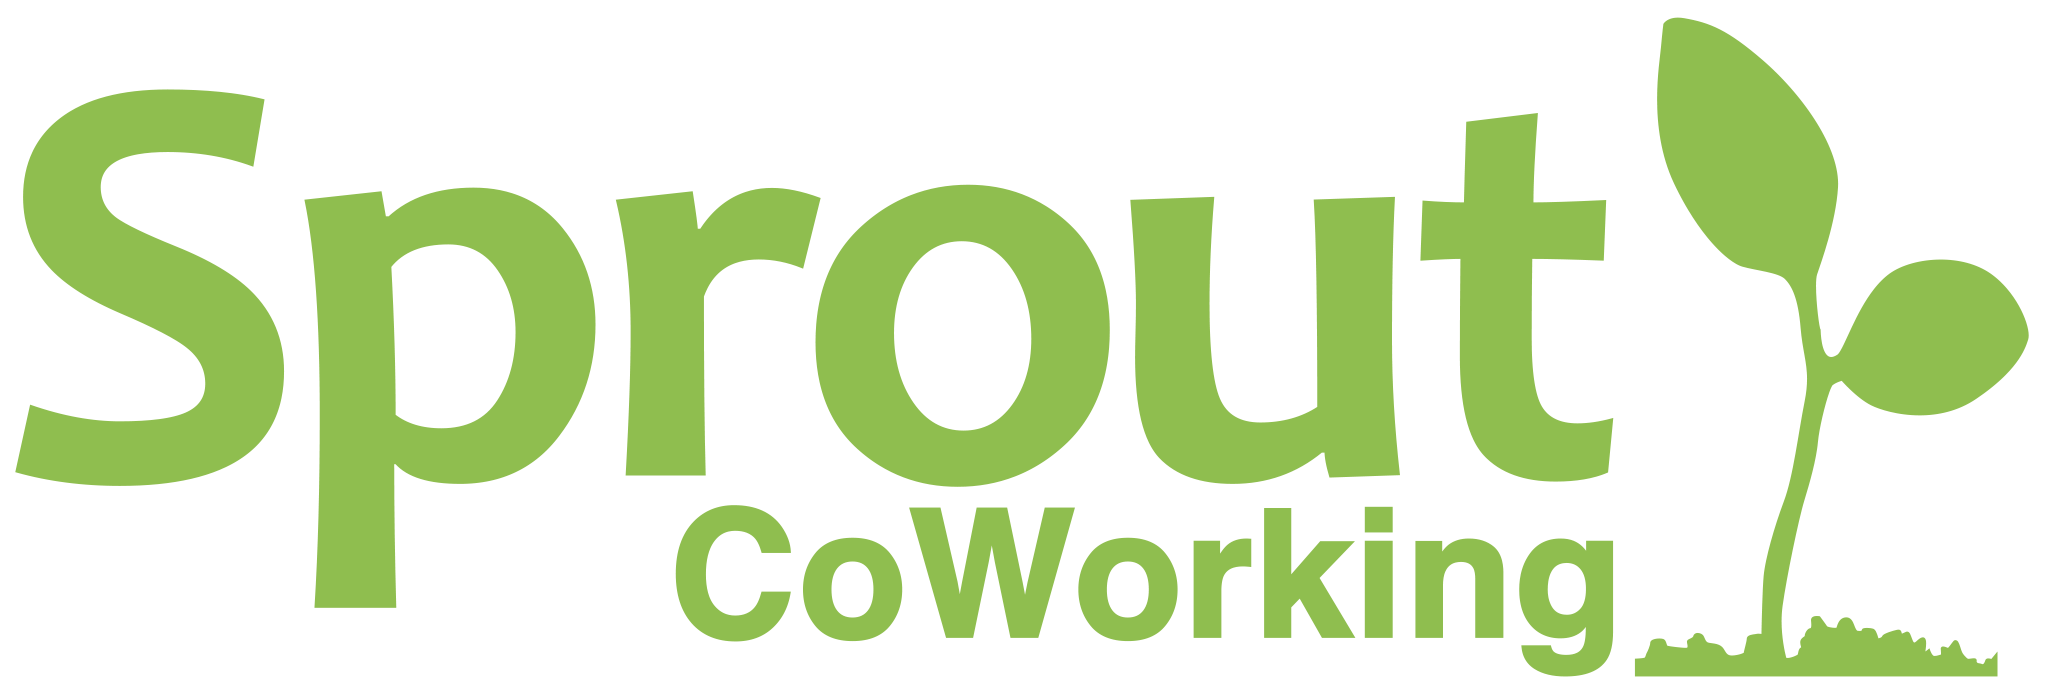 sprout_coworking_logo_transparent.png